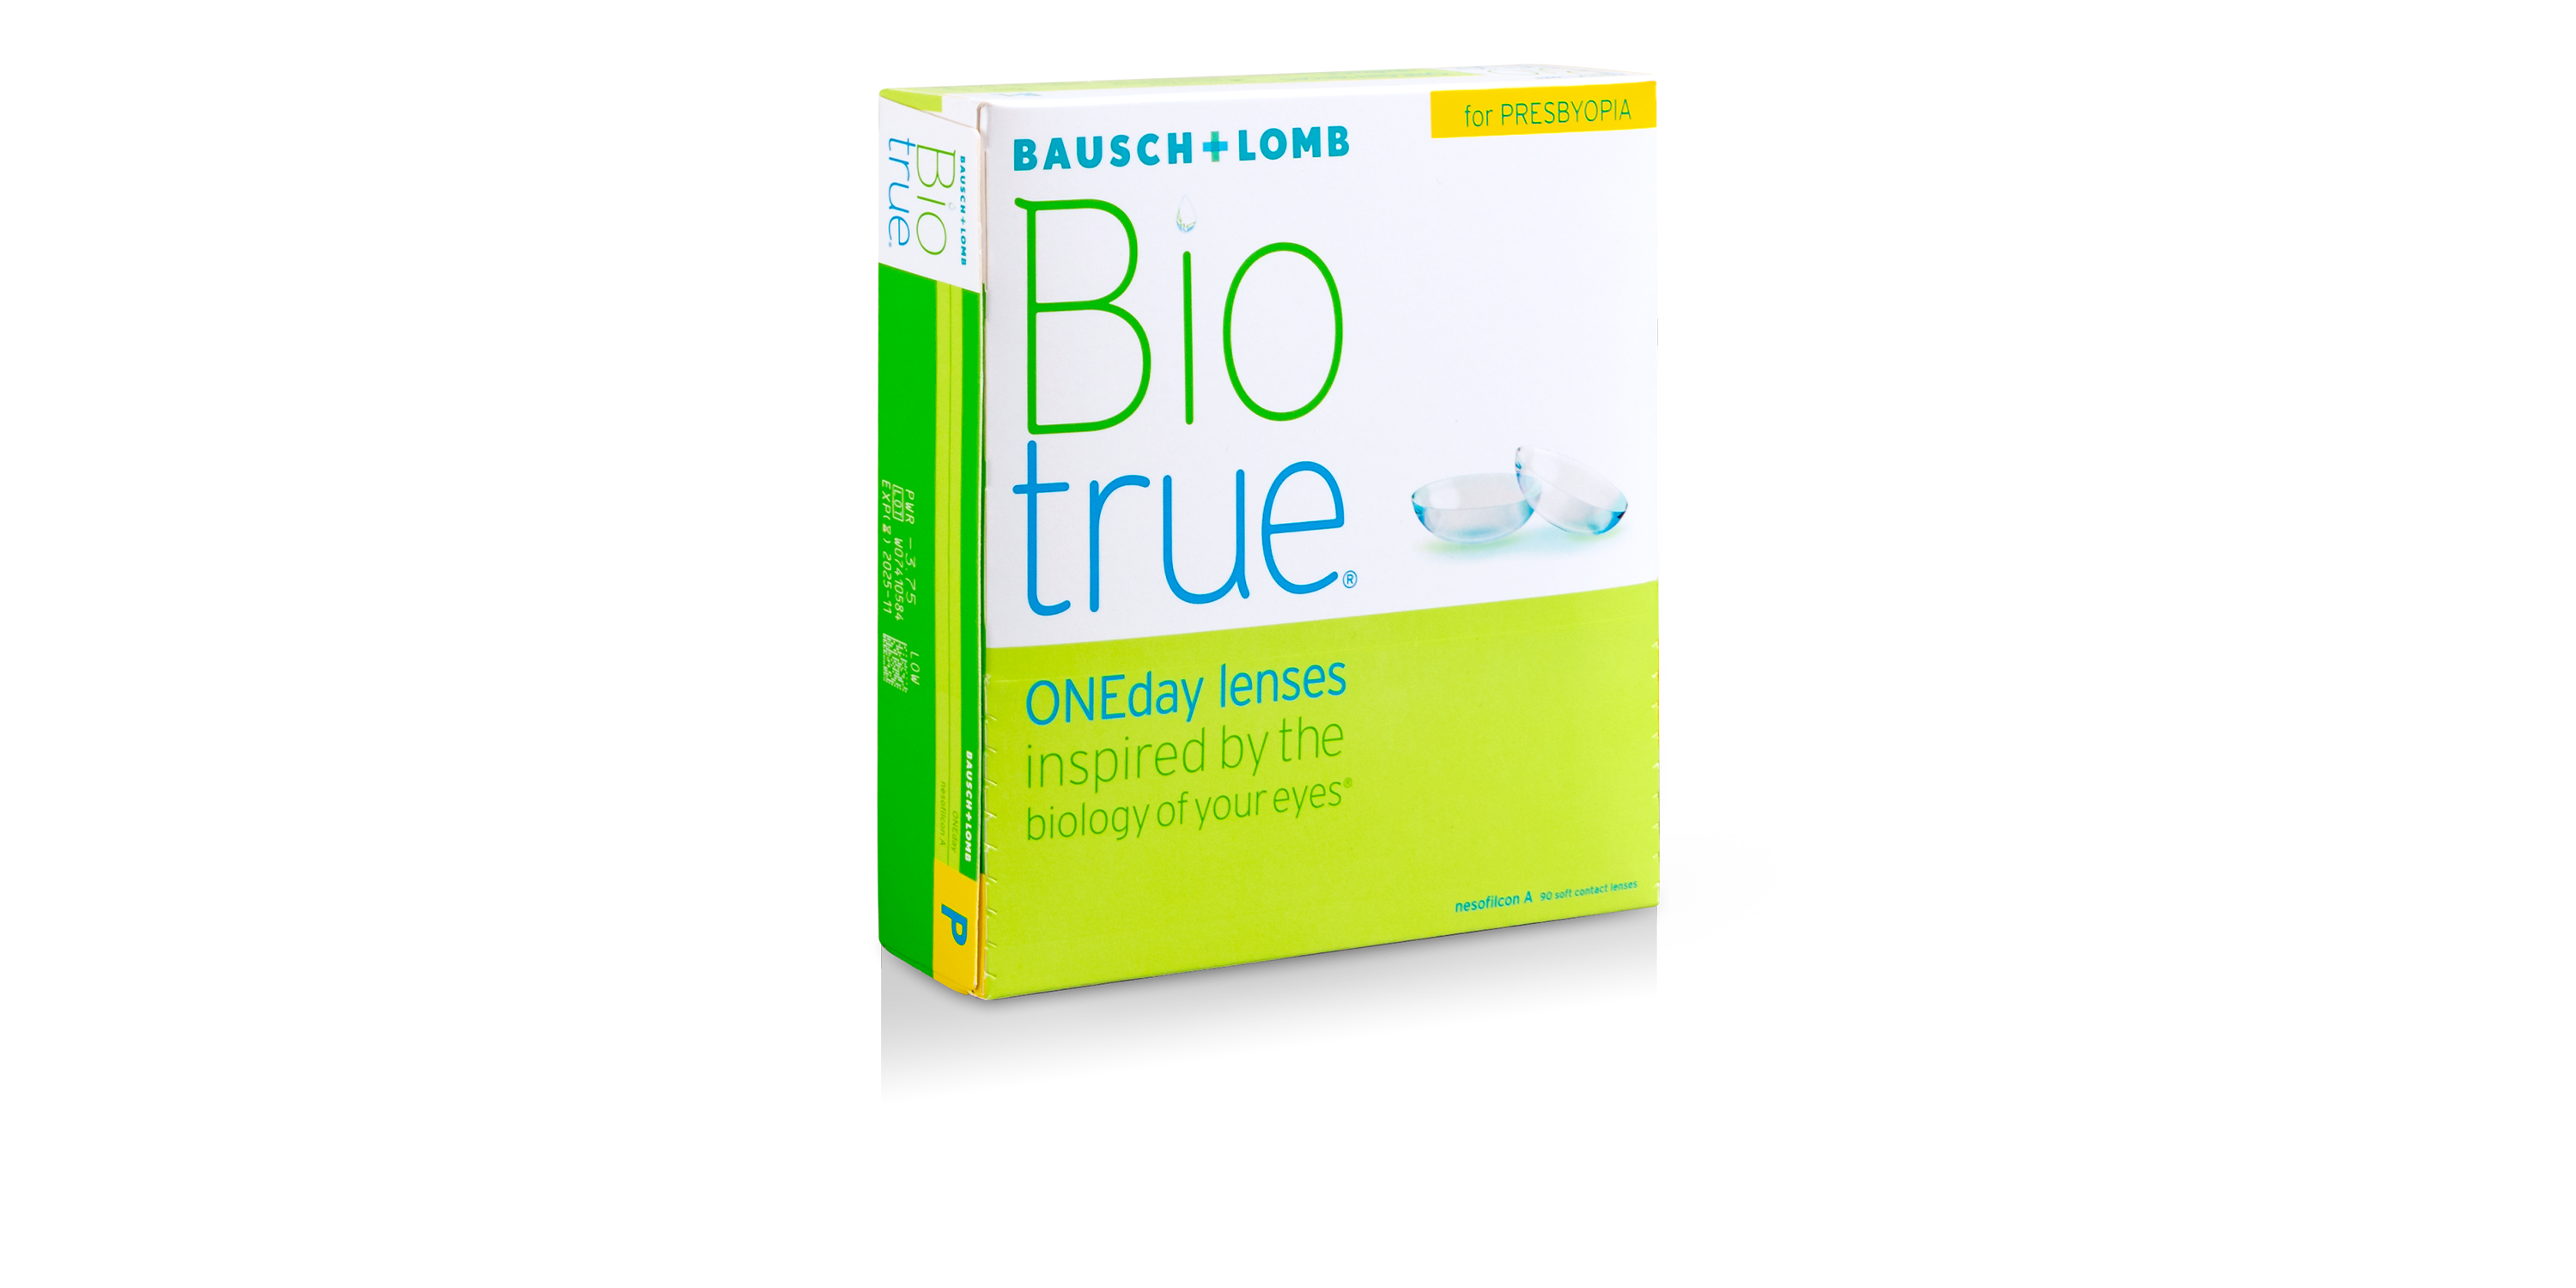 biotrue-oneday-for-presbyopia-90-pack-contact-lenses-lenscrafters